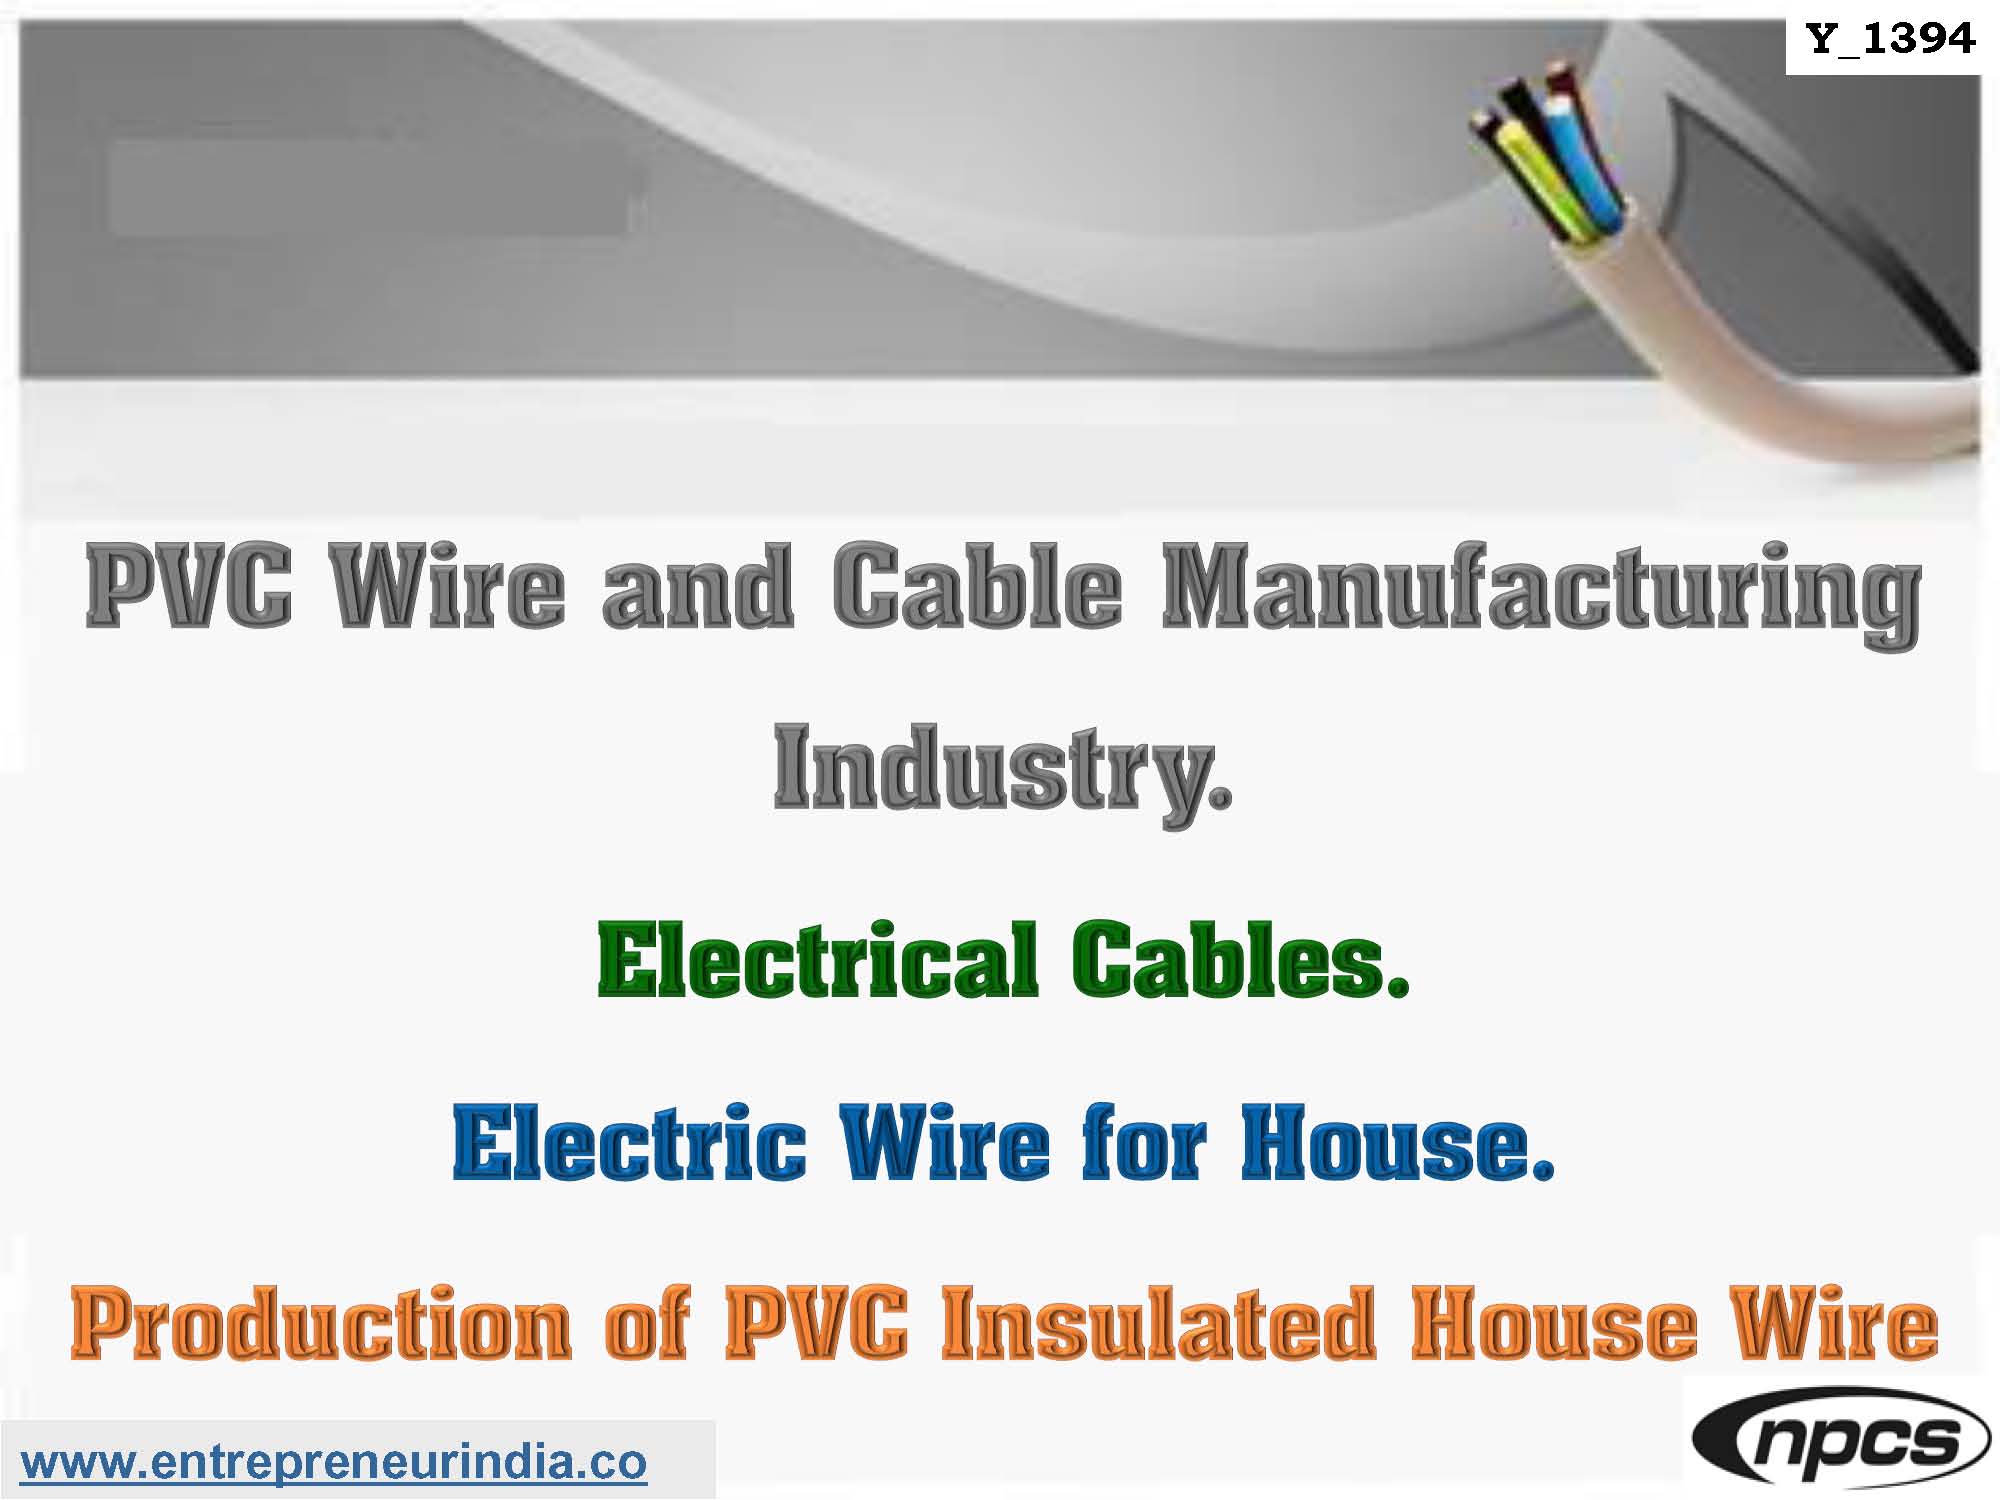 PVC Wire and Cable Manufacturing Industry.jpg